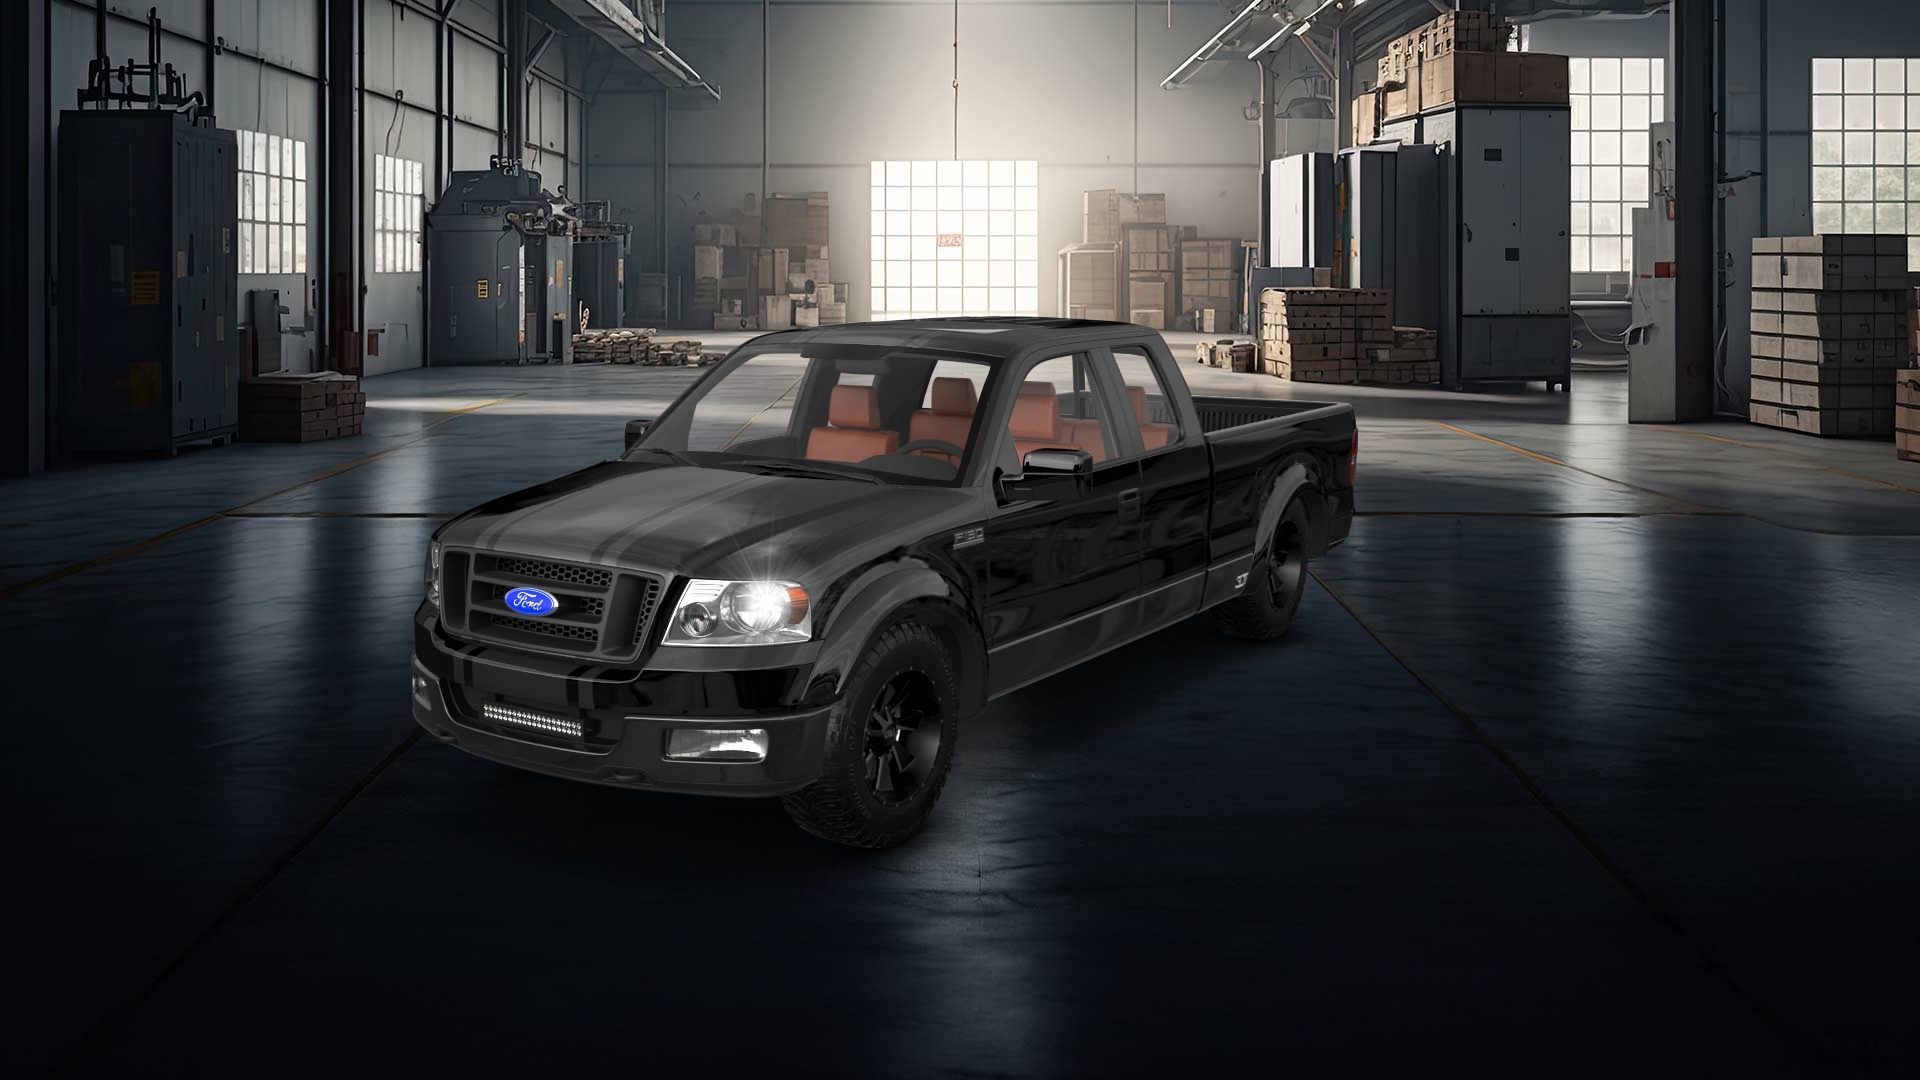 Ford F-150 SuperCab 4 Door pickup truck 2004